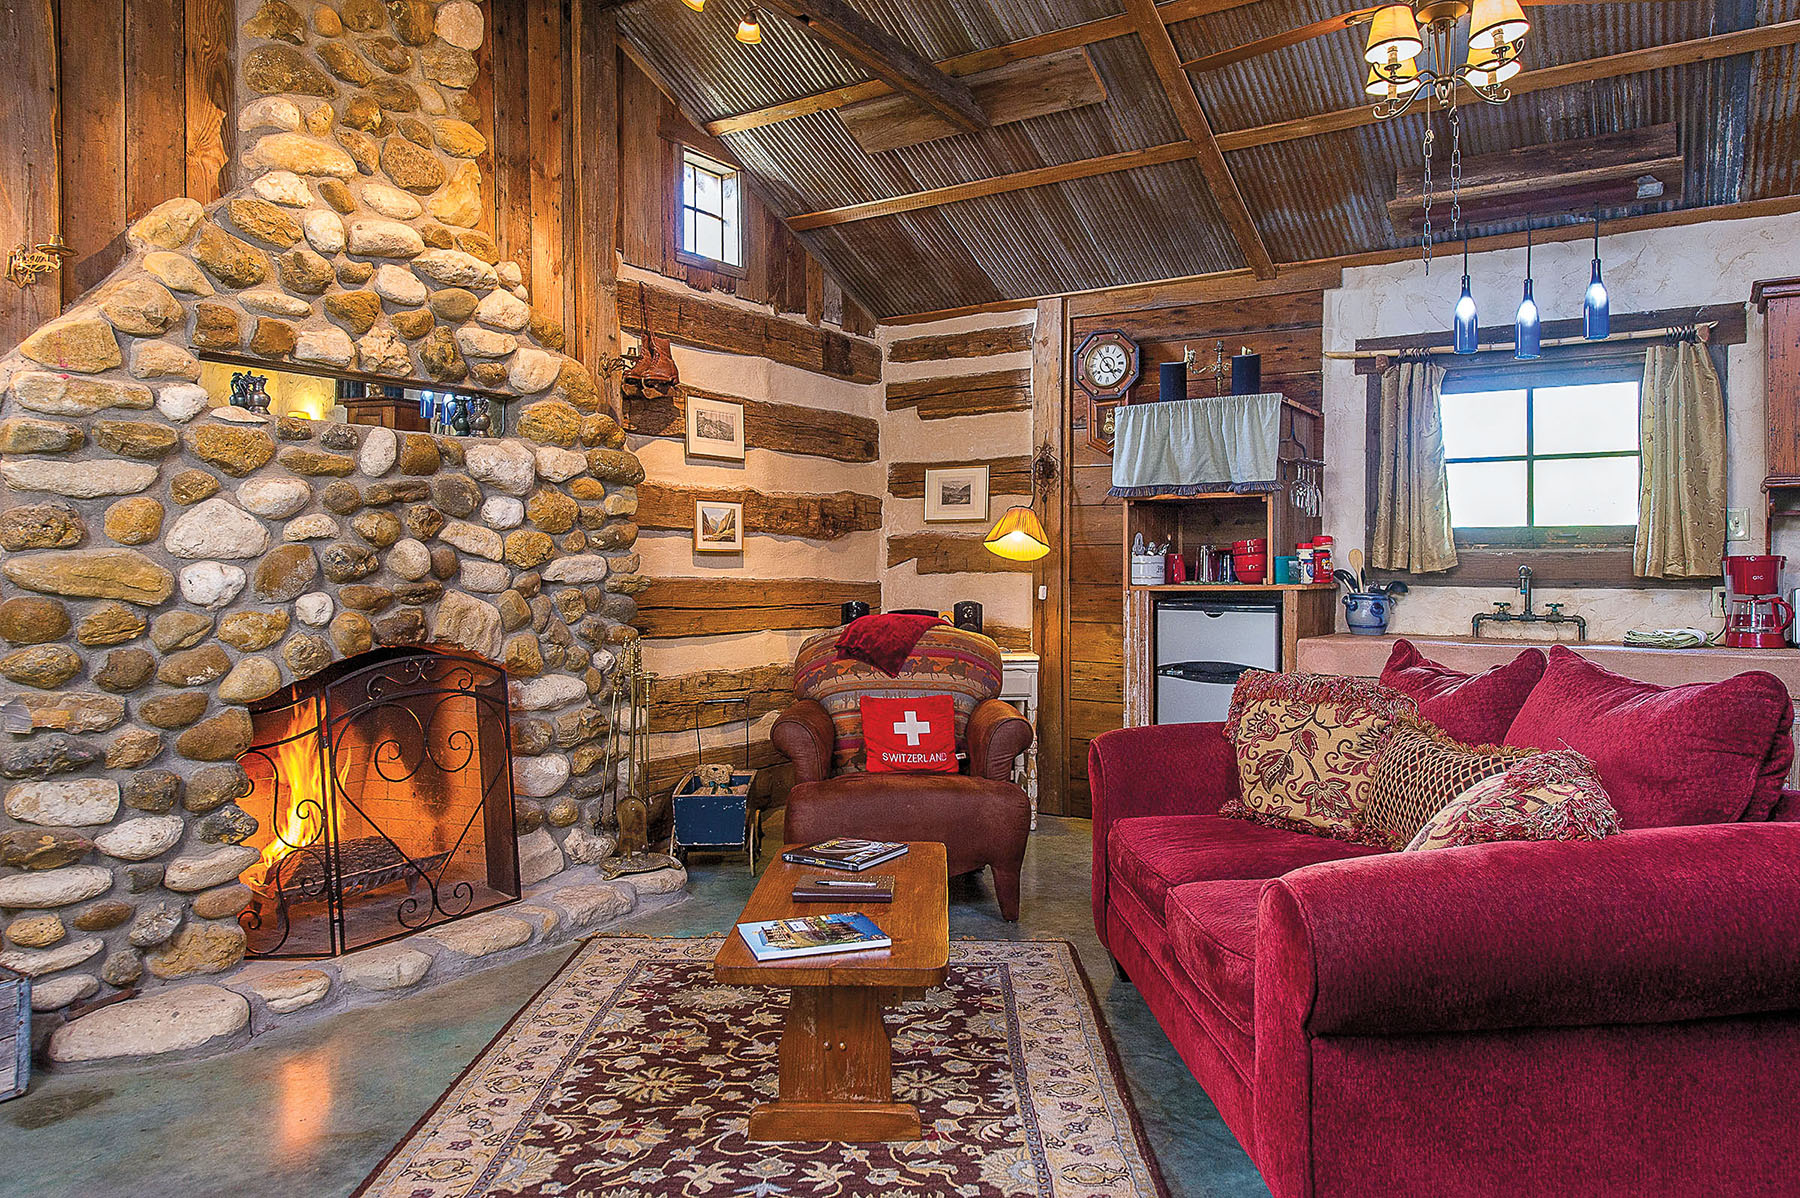 The interior of a lodge with a large stone fireplace and red furniture